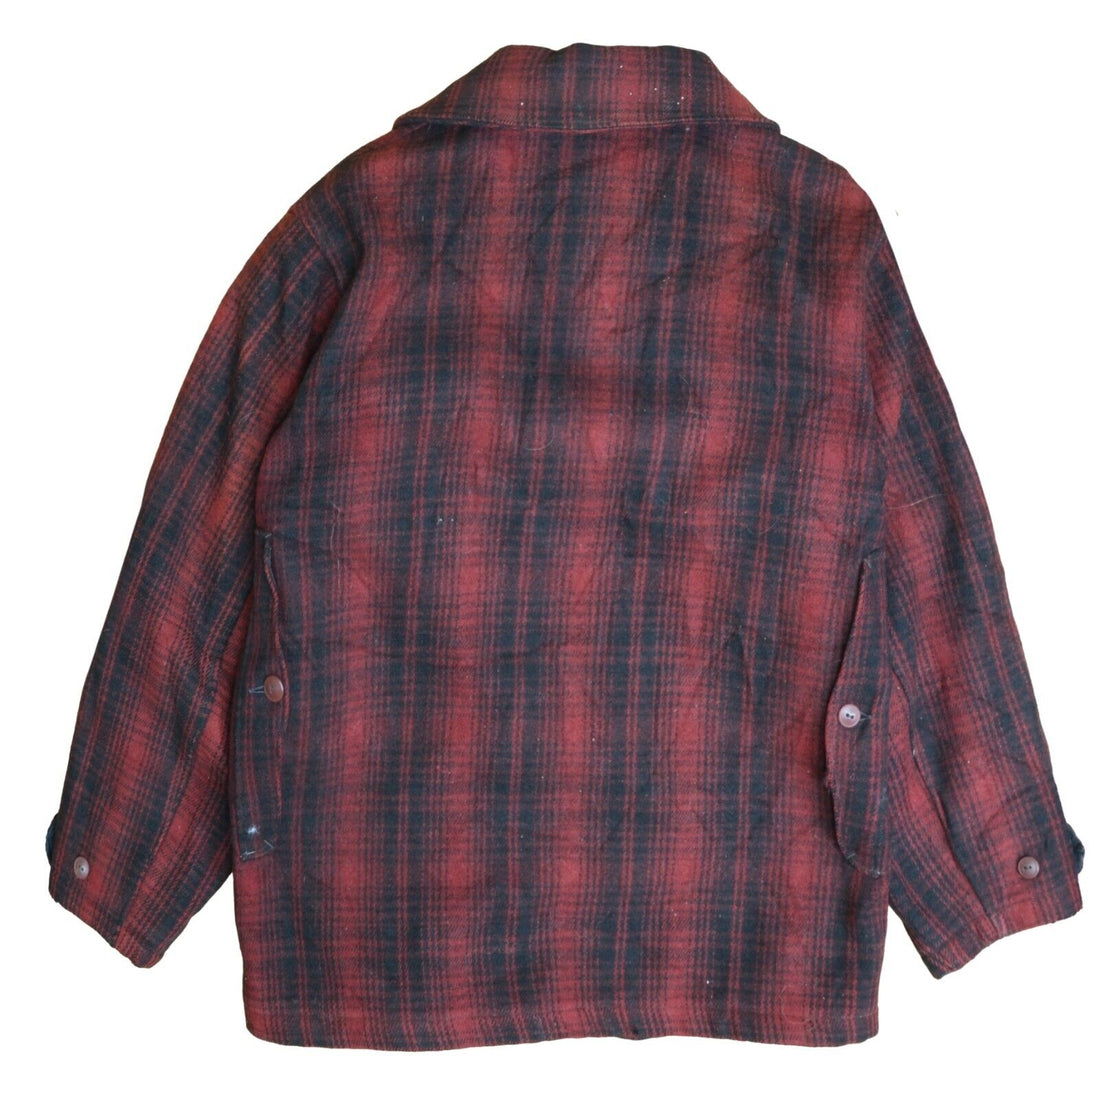 Vintage Woolrich Mackinaw Hunting Wool Coat Jacket Size Large Red Plaid 30s 40s